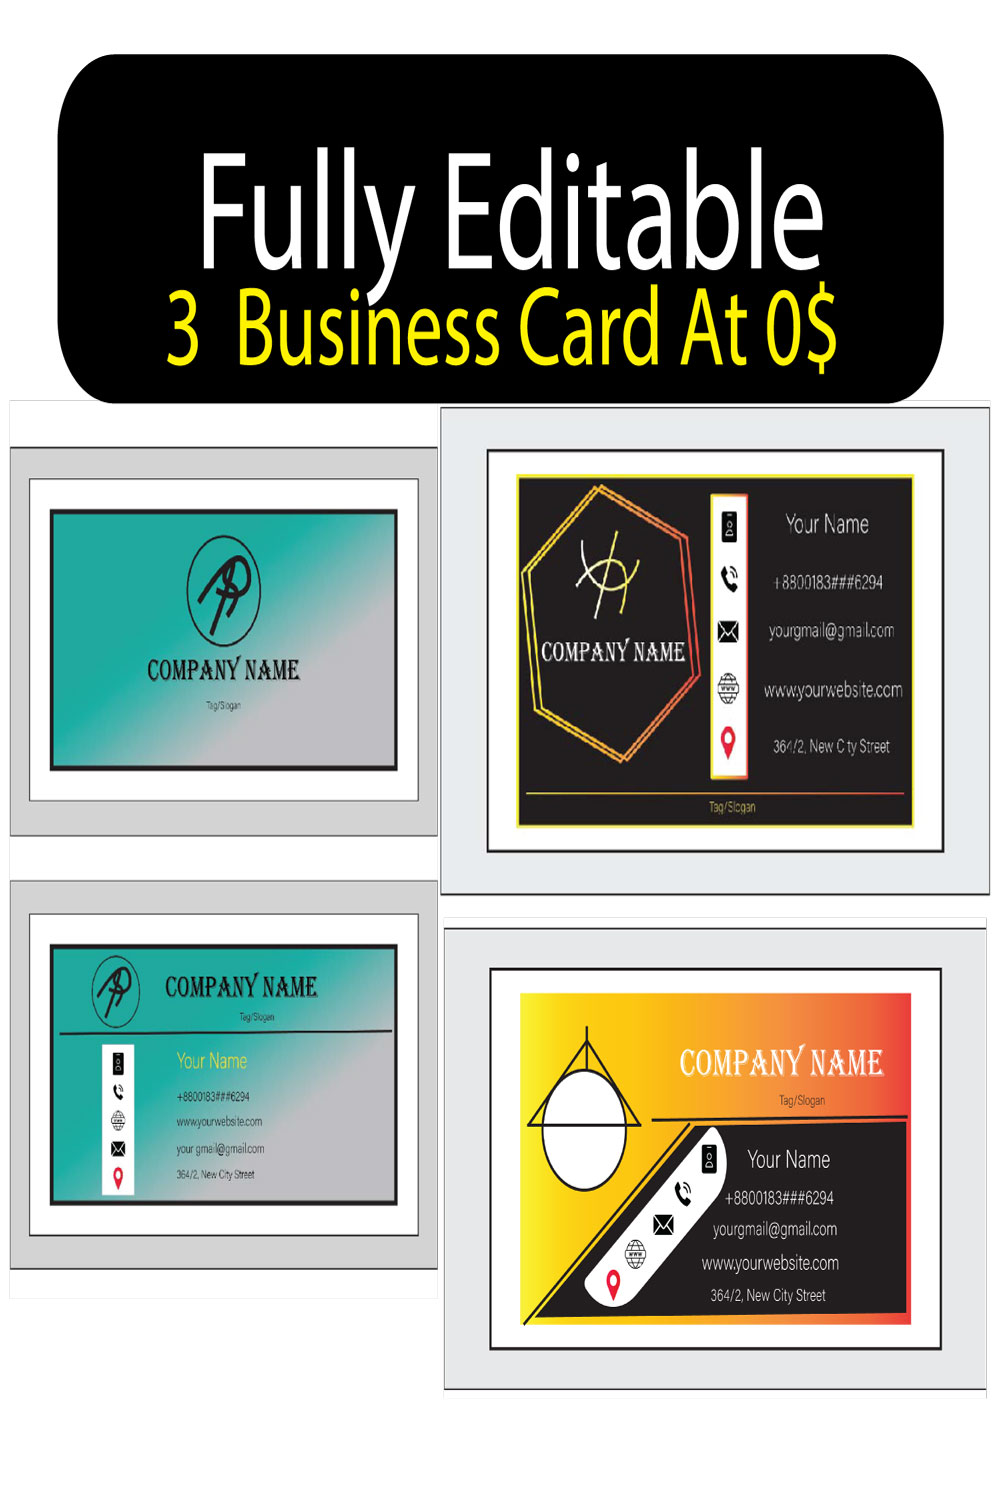 Fully Editable Business Card - pinterest image preview.